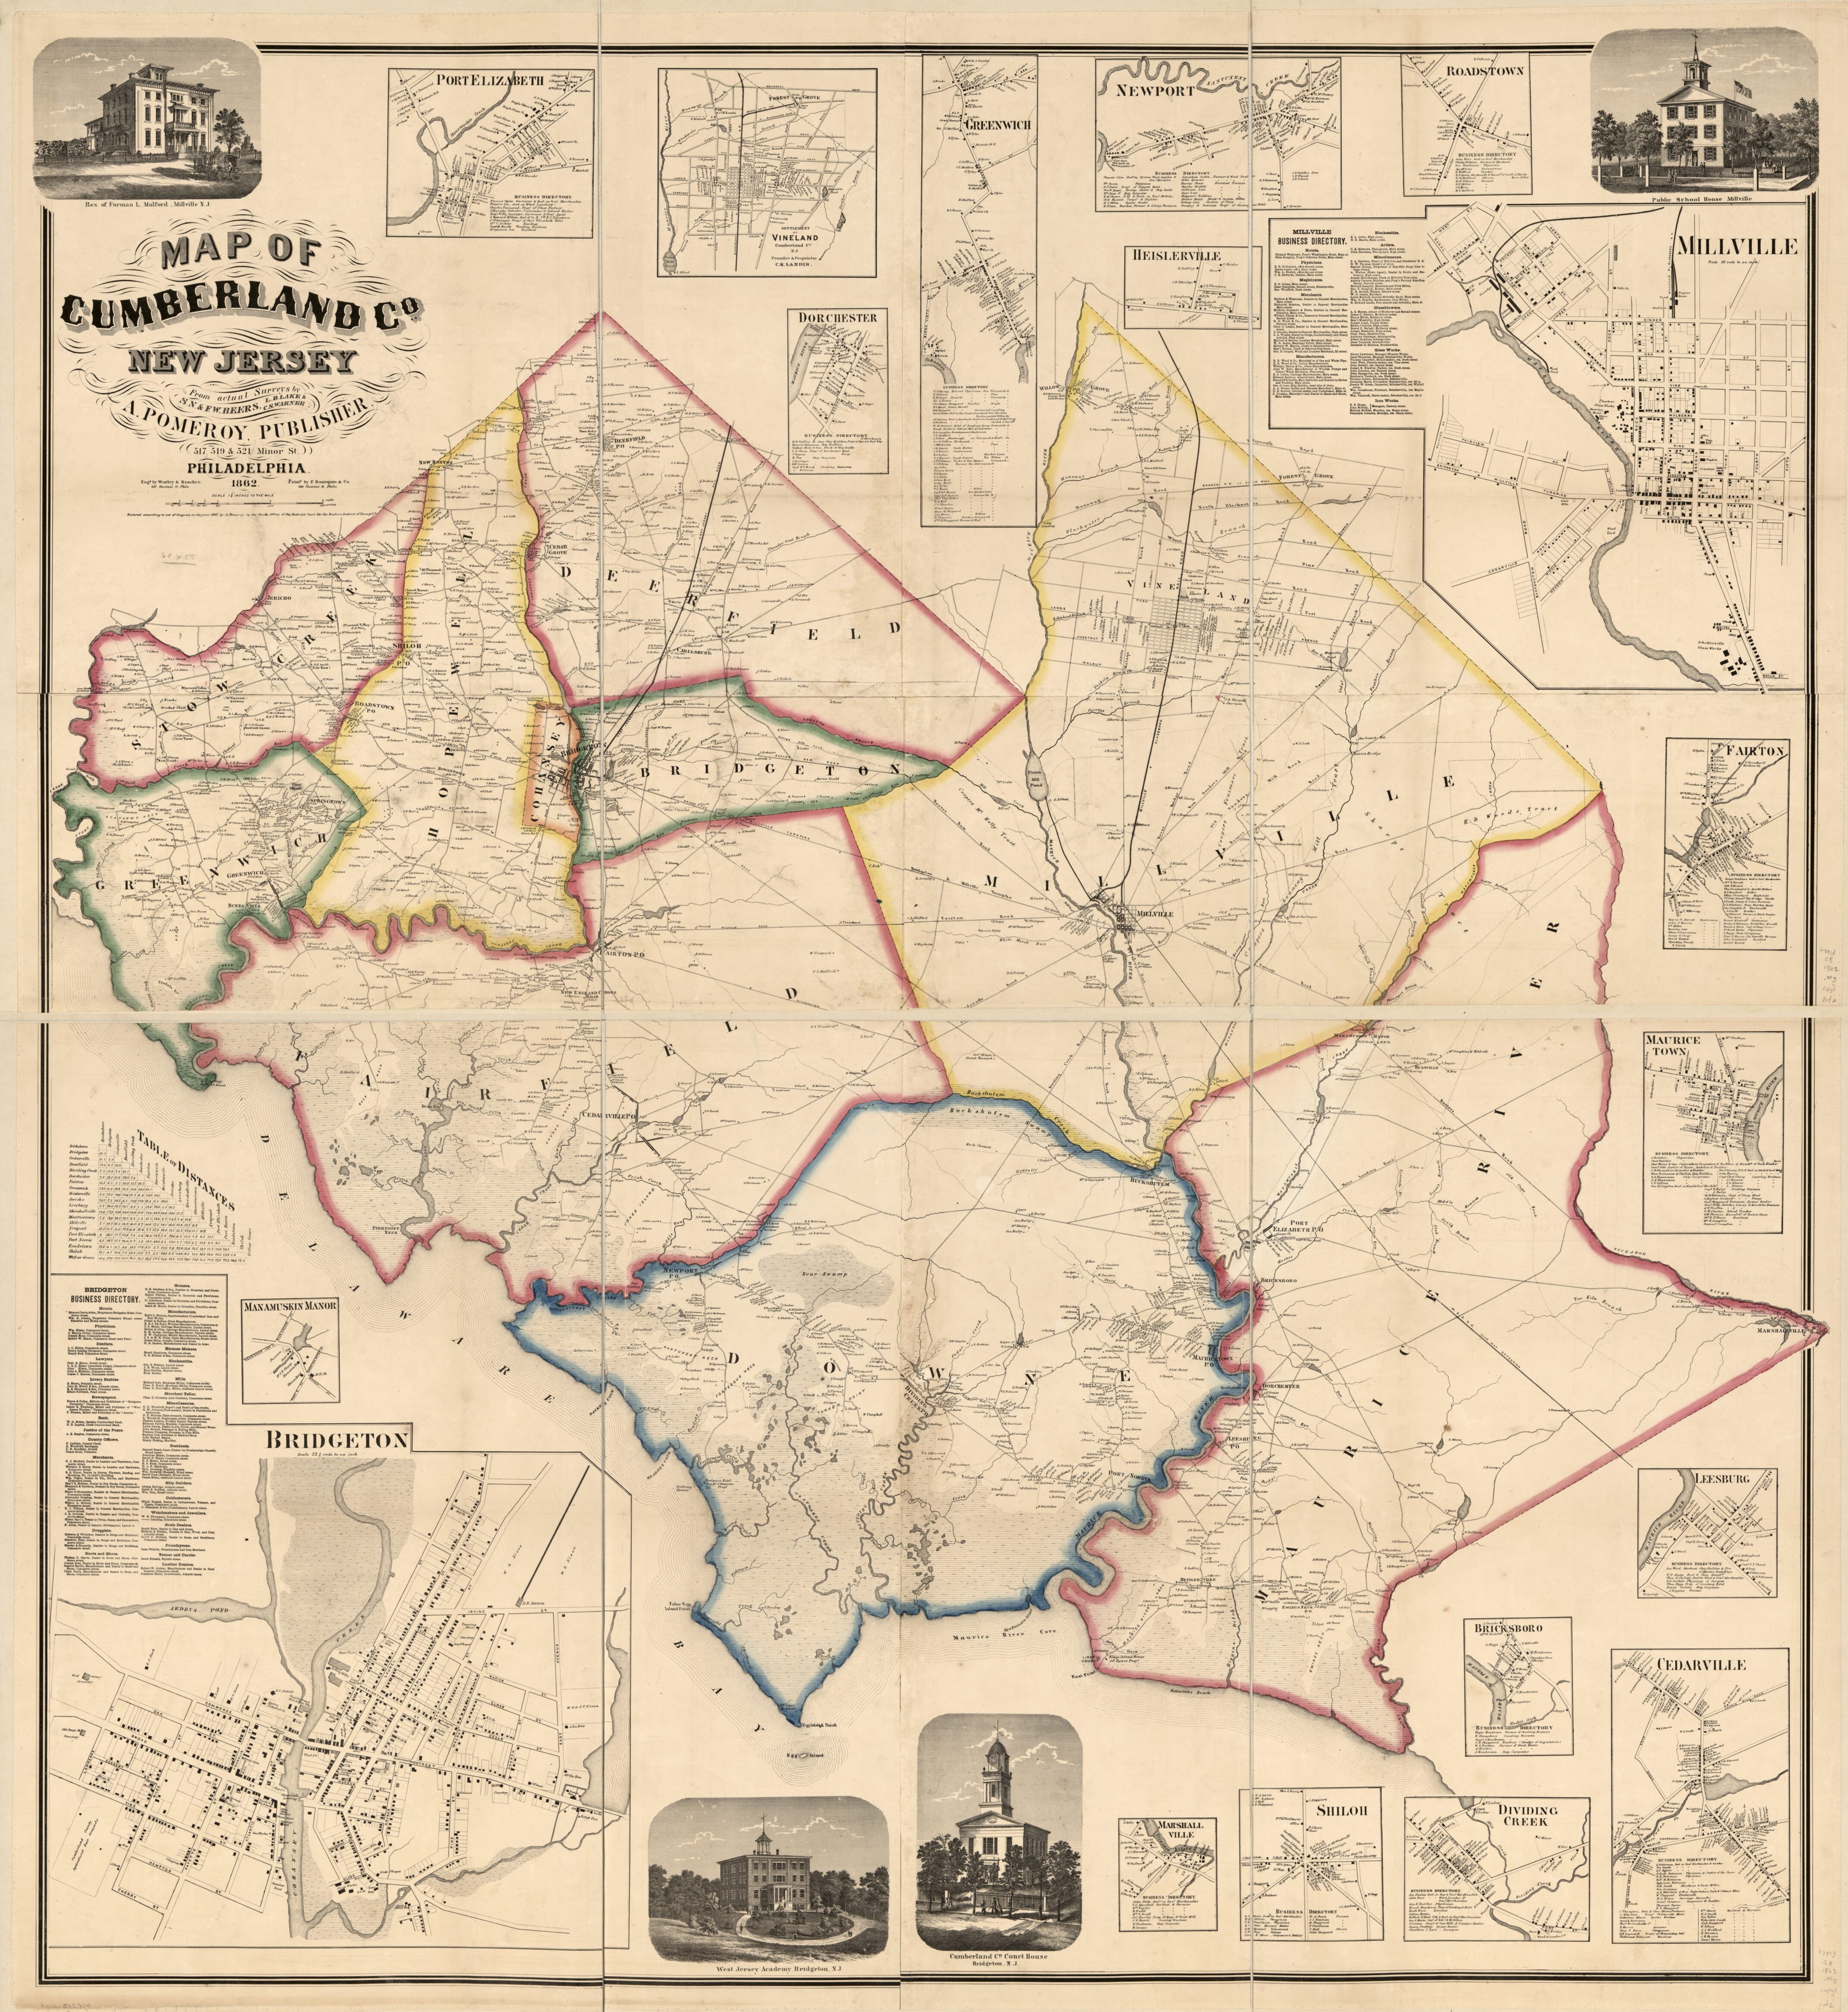 This old map of Map of Cumberland Co., New Jersey : from Actual Surveys (Map of Cumberland County, New Jersey) from 1862 was created by  A. Pomeroy &amp; Co, F. W. (Frederick W.) Beers, S. N. Beers, L. B. Lake, C. S. (Charles S.) Warner in 1862